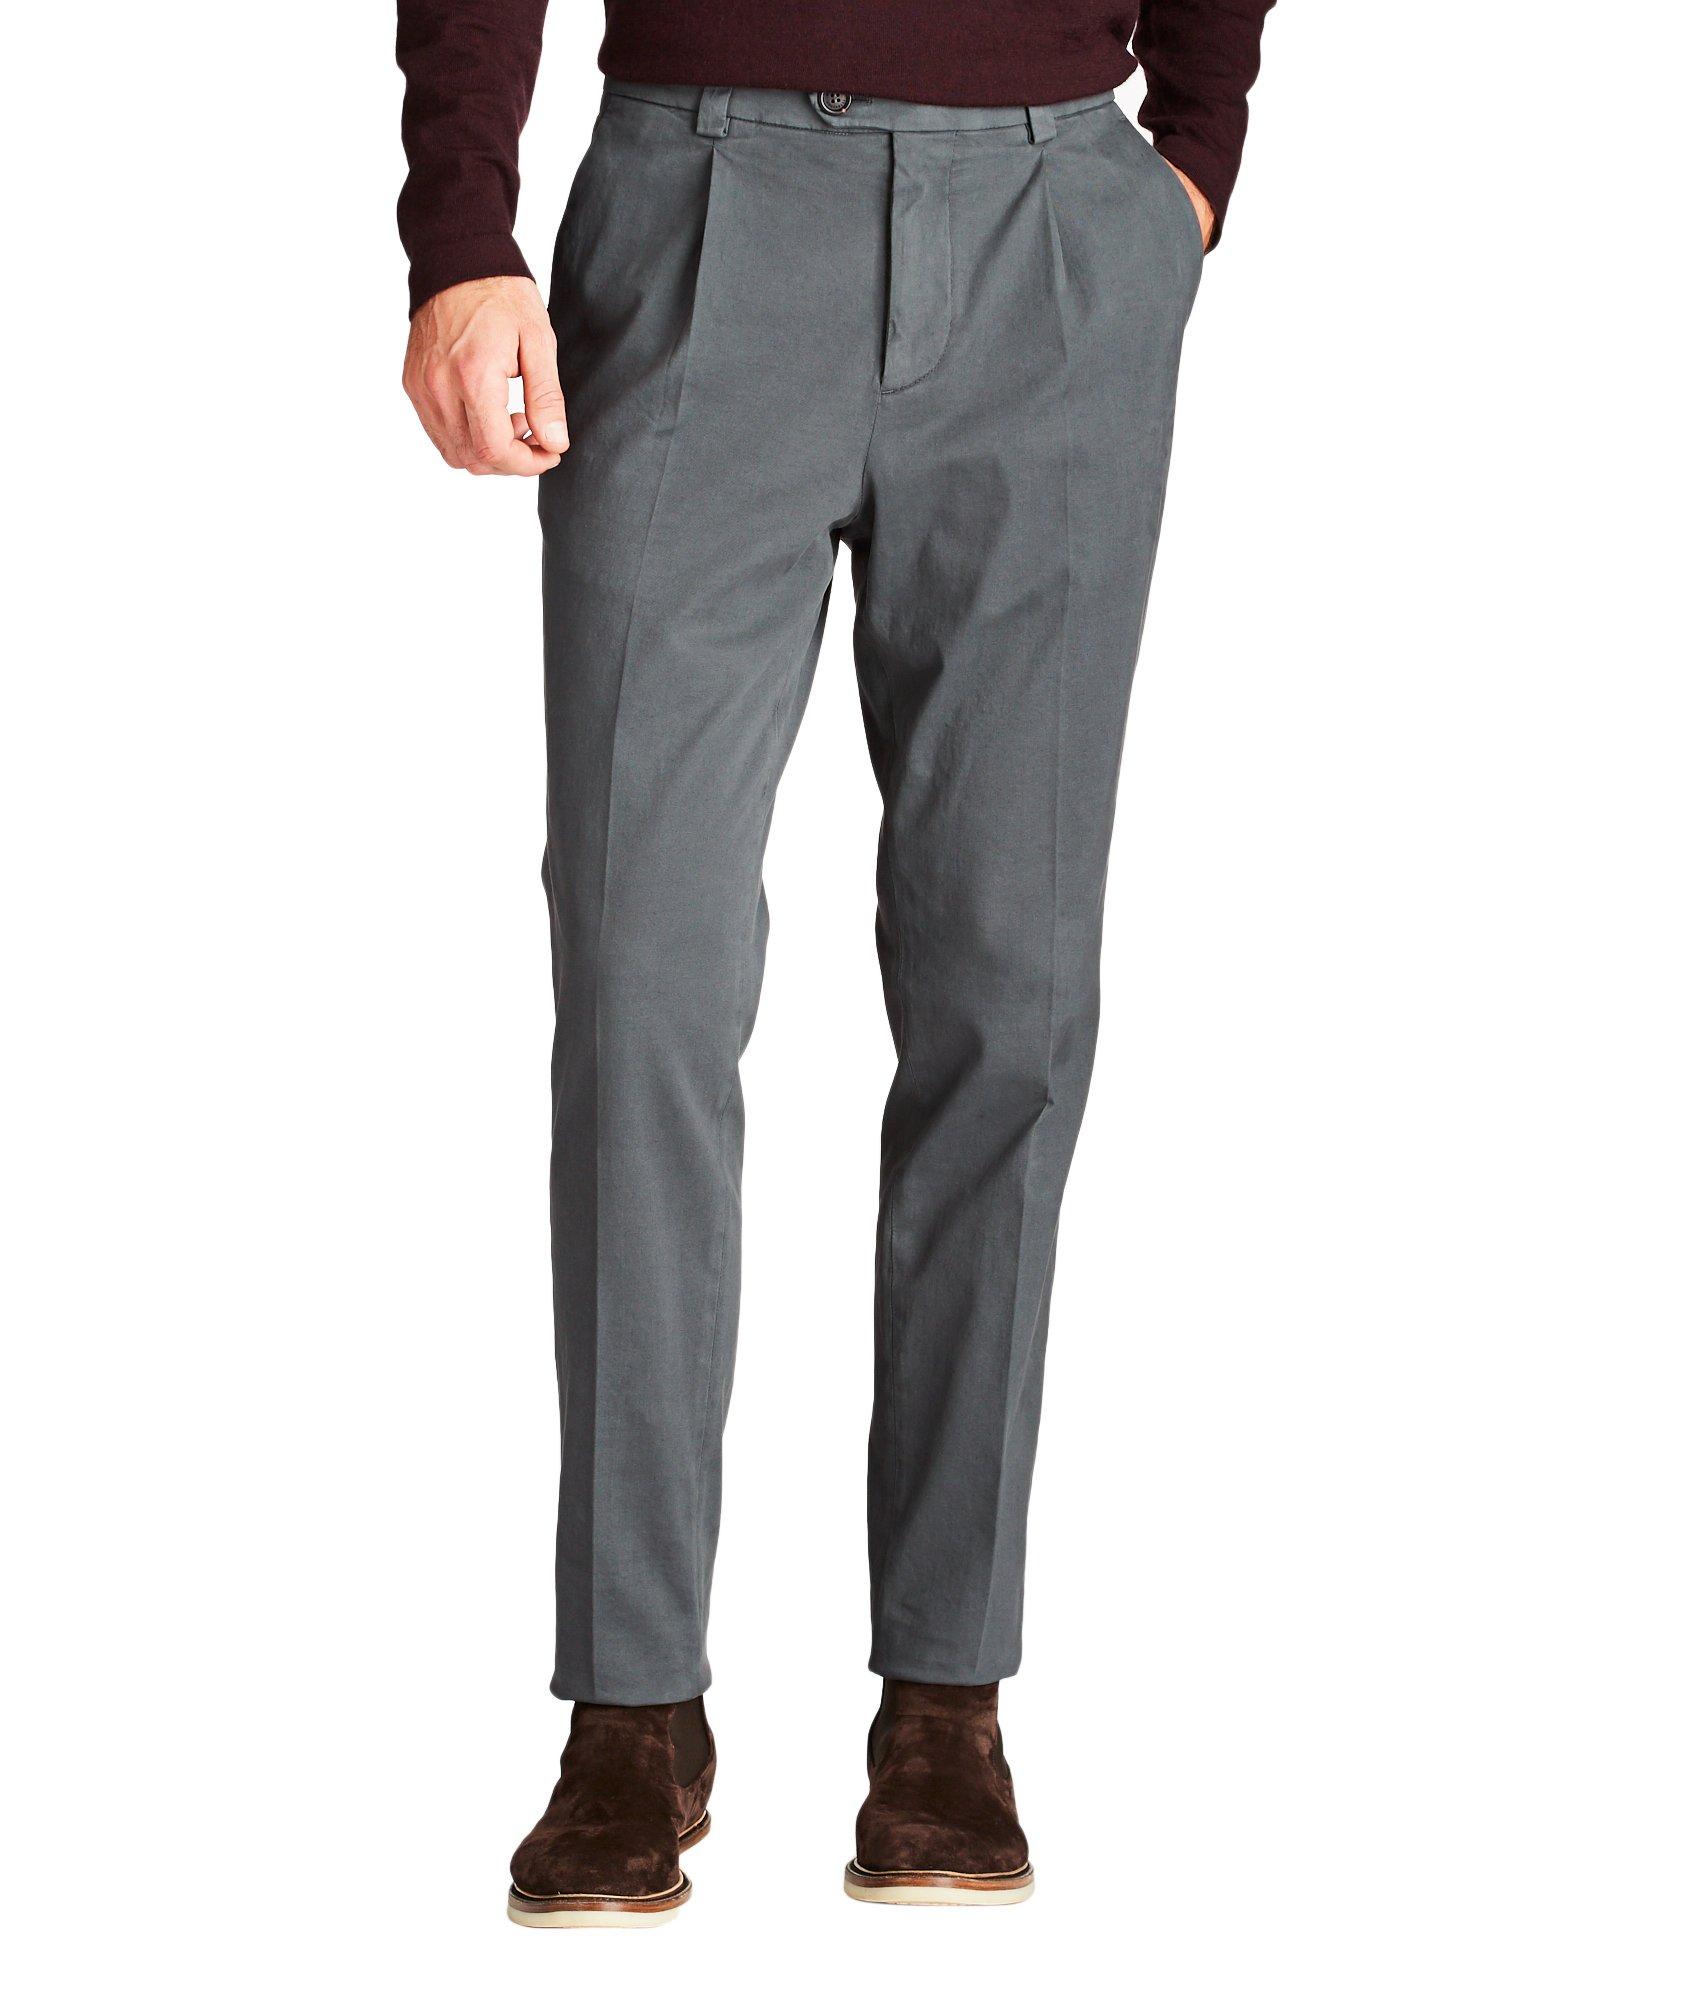 Cotton Blend Chinos image 0